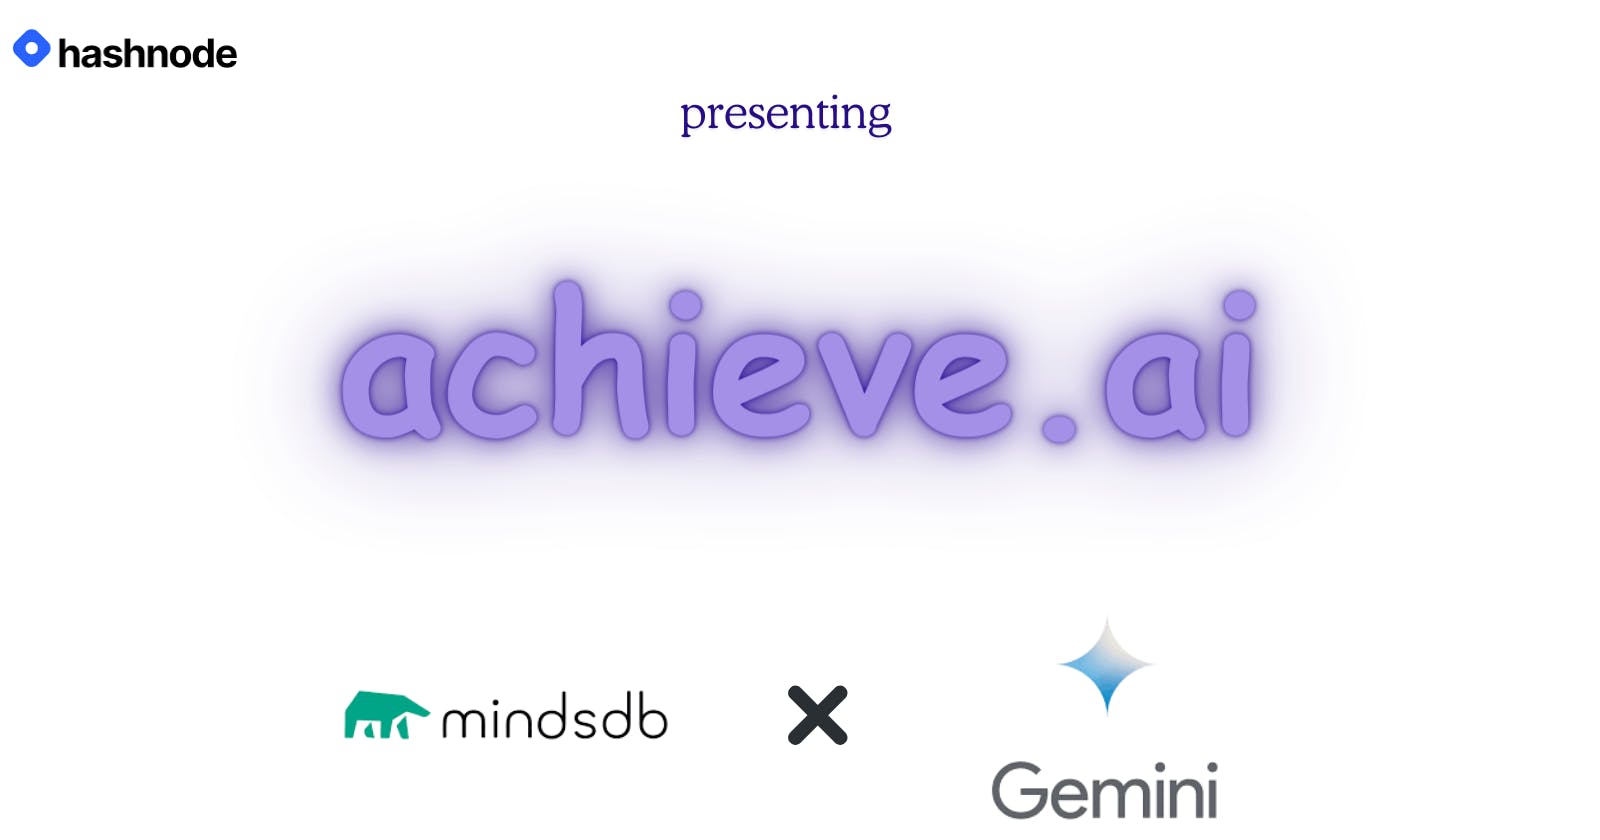 achieve.ai Powered by MindsDB: Transforming Your Goals Into Reality